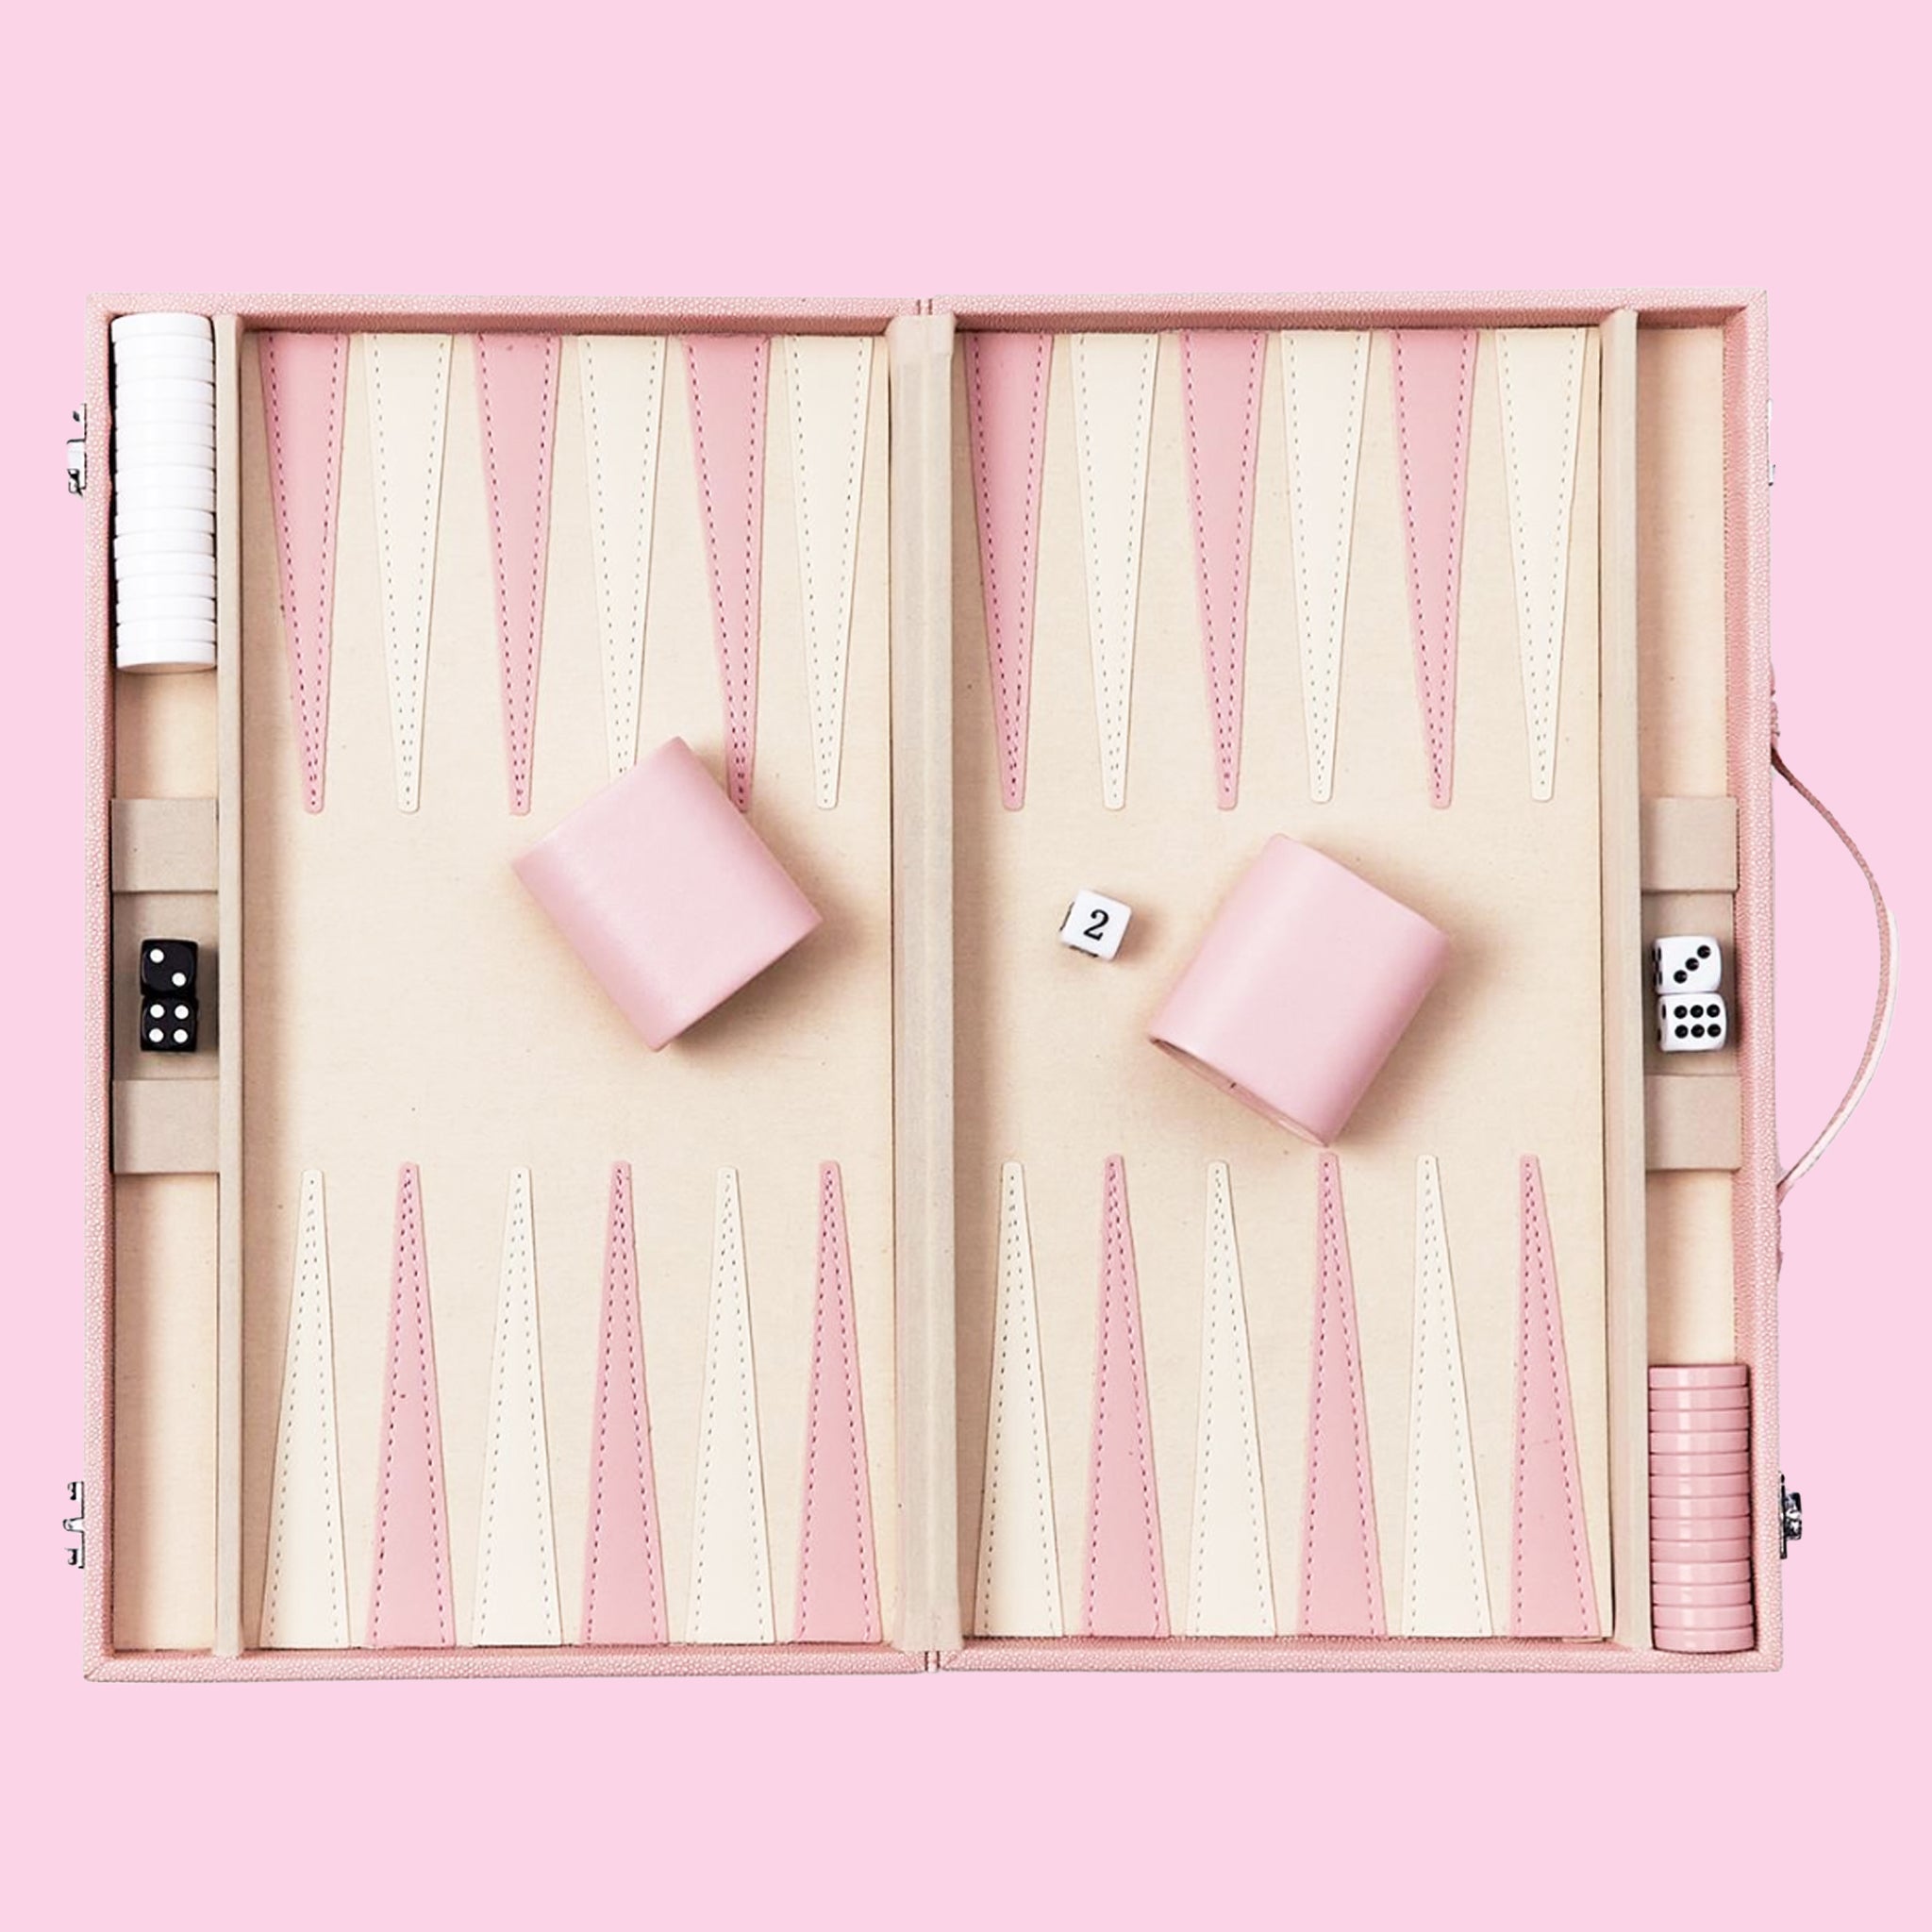 On a pink background is a pink and tan backgammon board game set. 